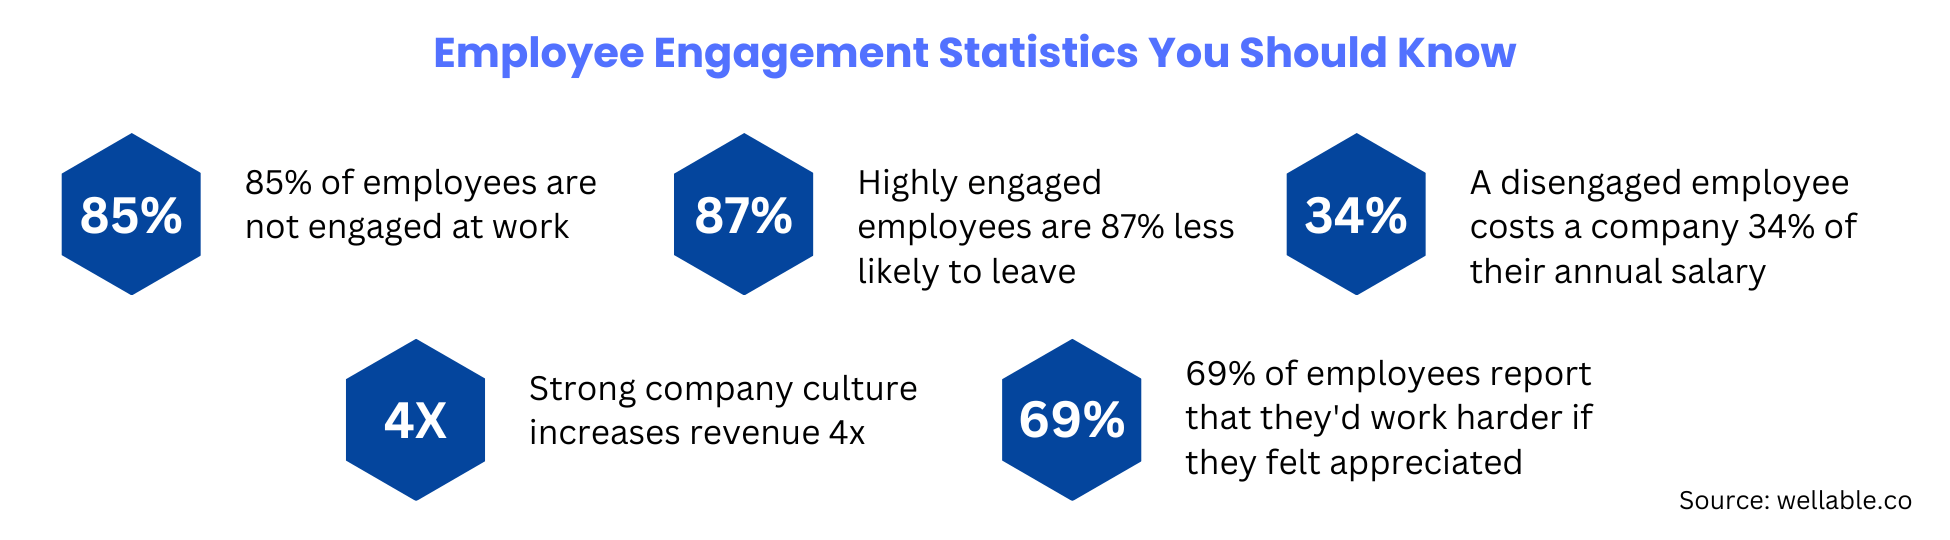 employee-engagement-statistics-you-should-know